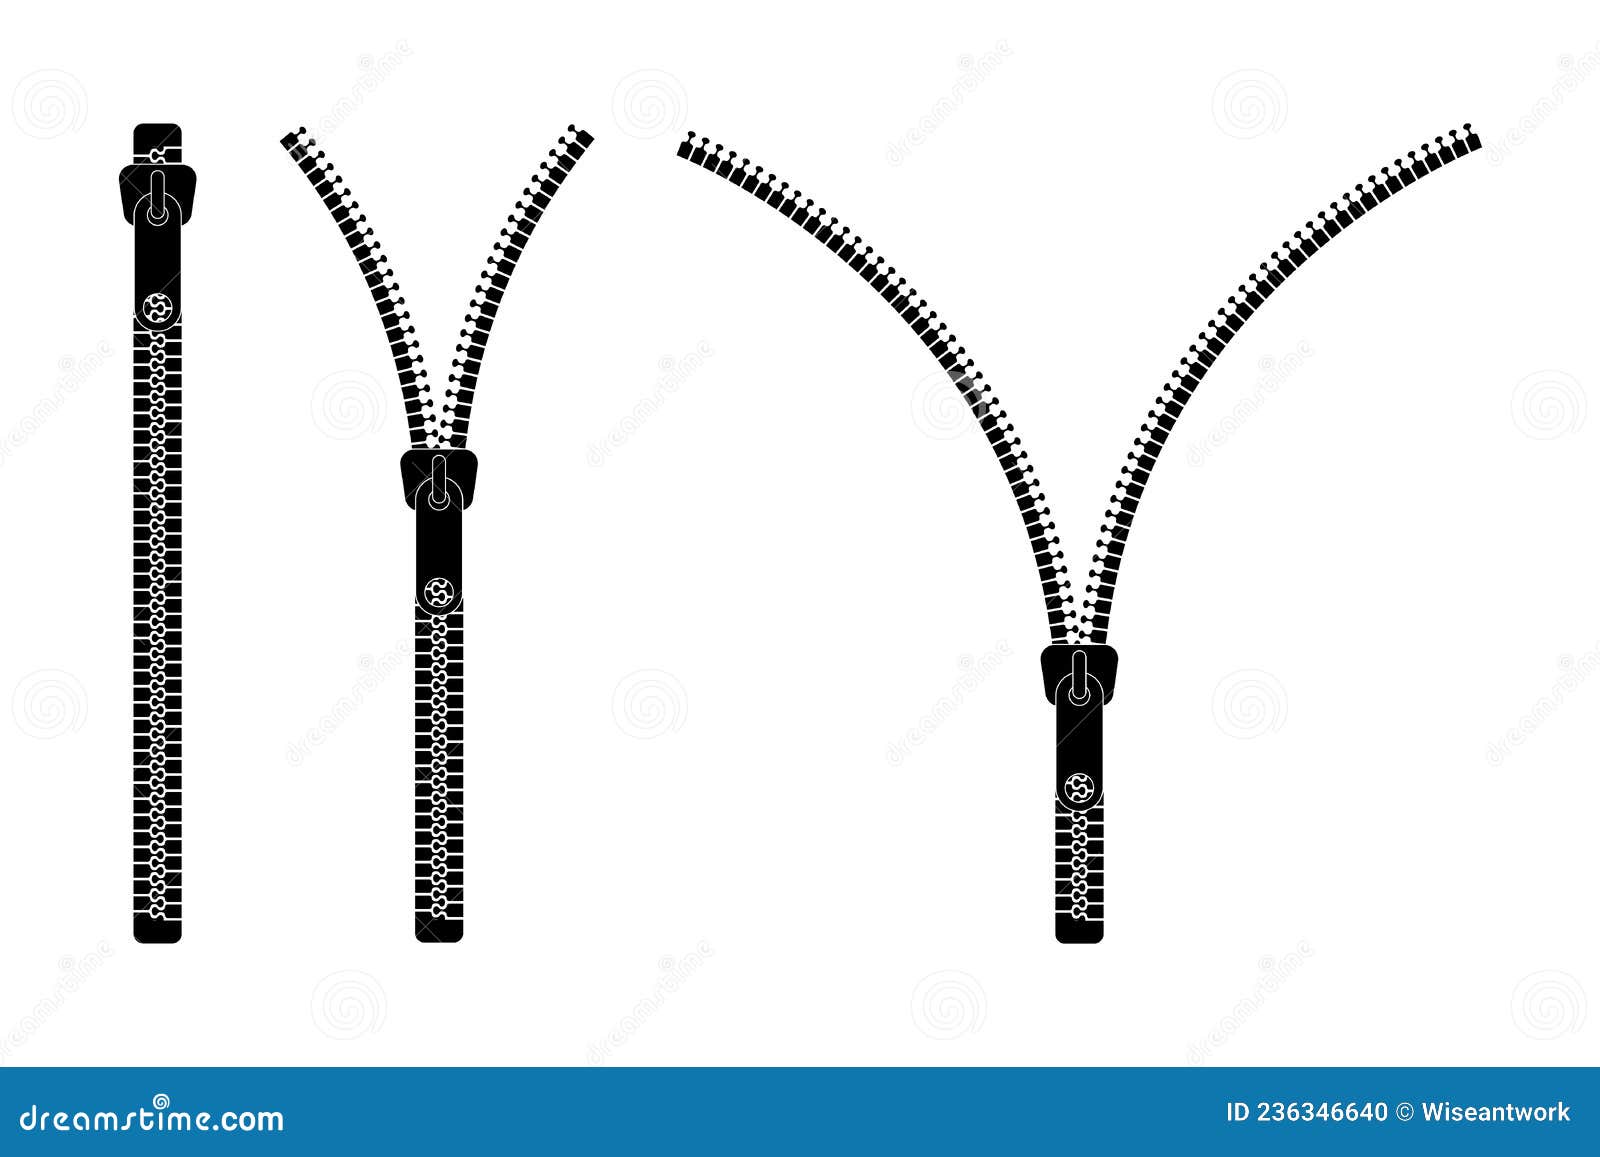 Unzip Zipper Or Fastener Isolated On White Stock Photo - Download